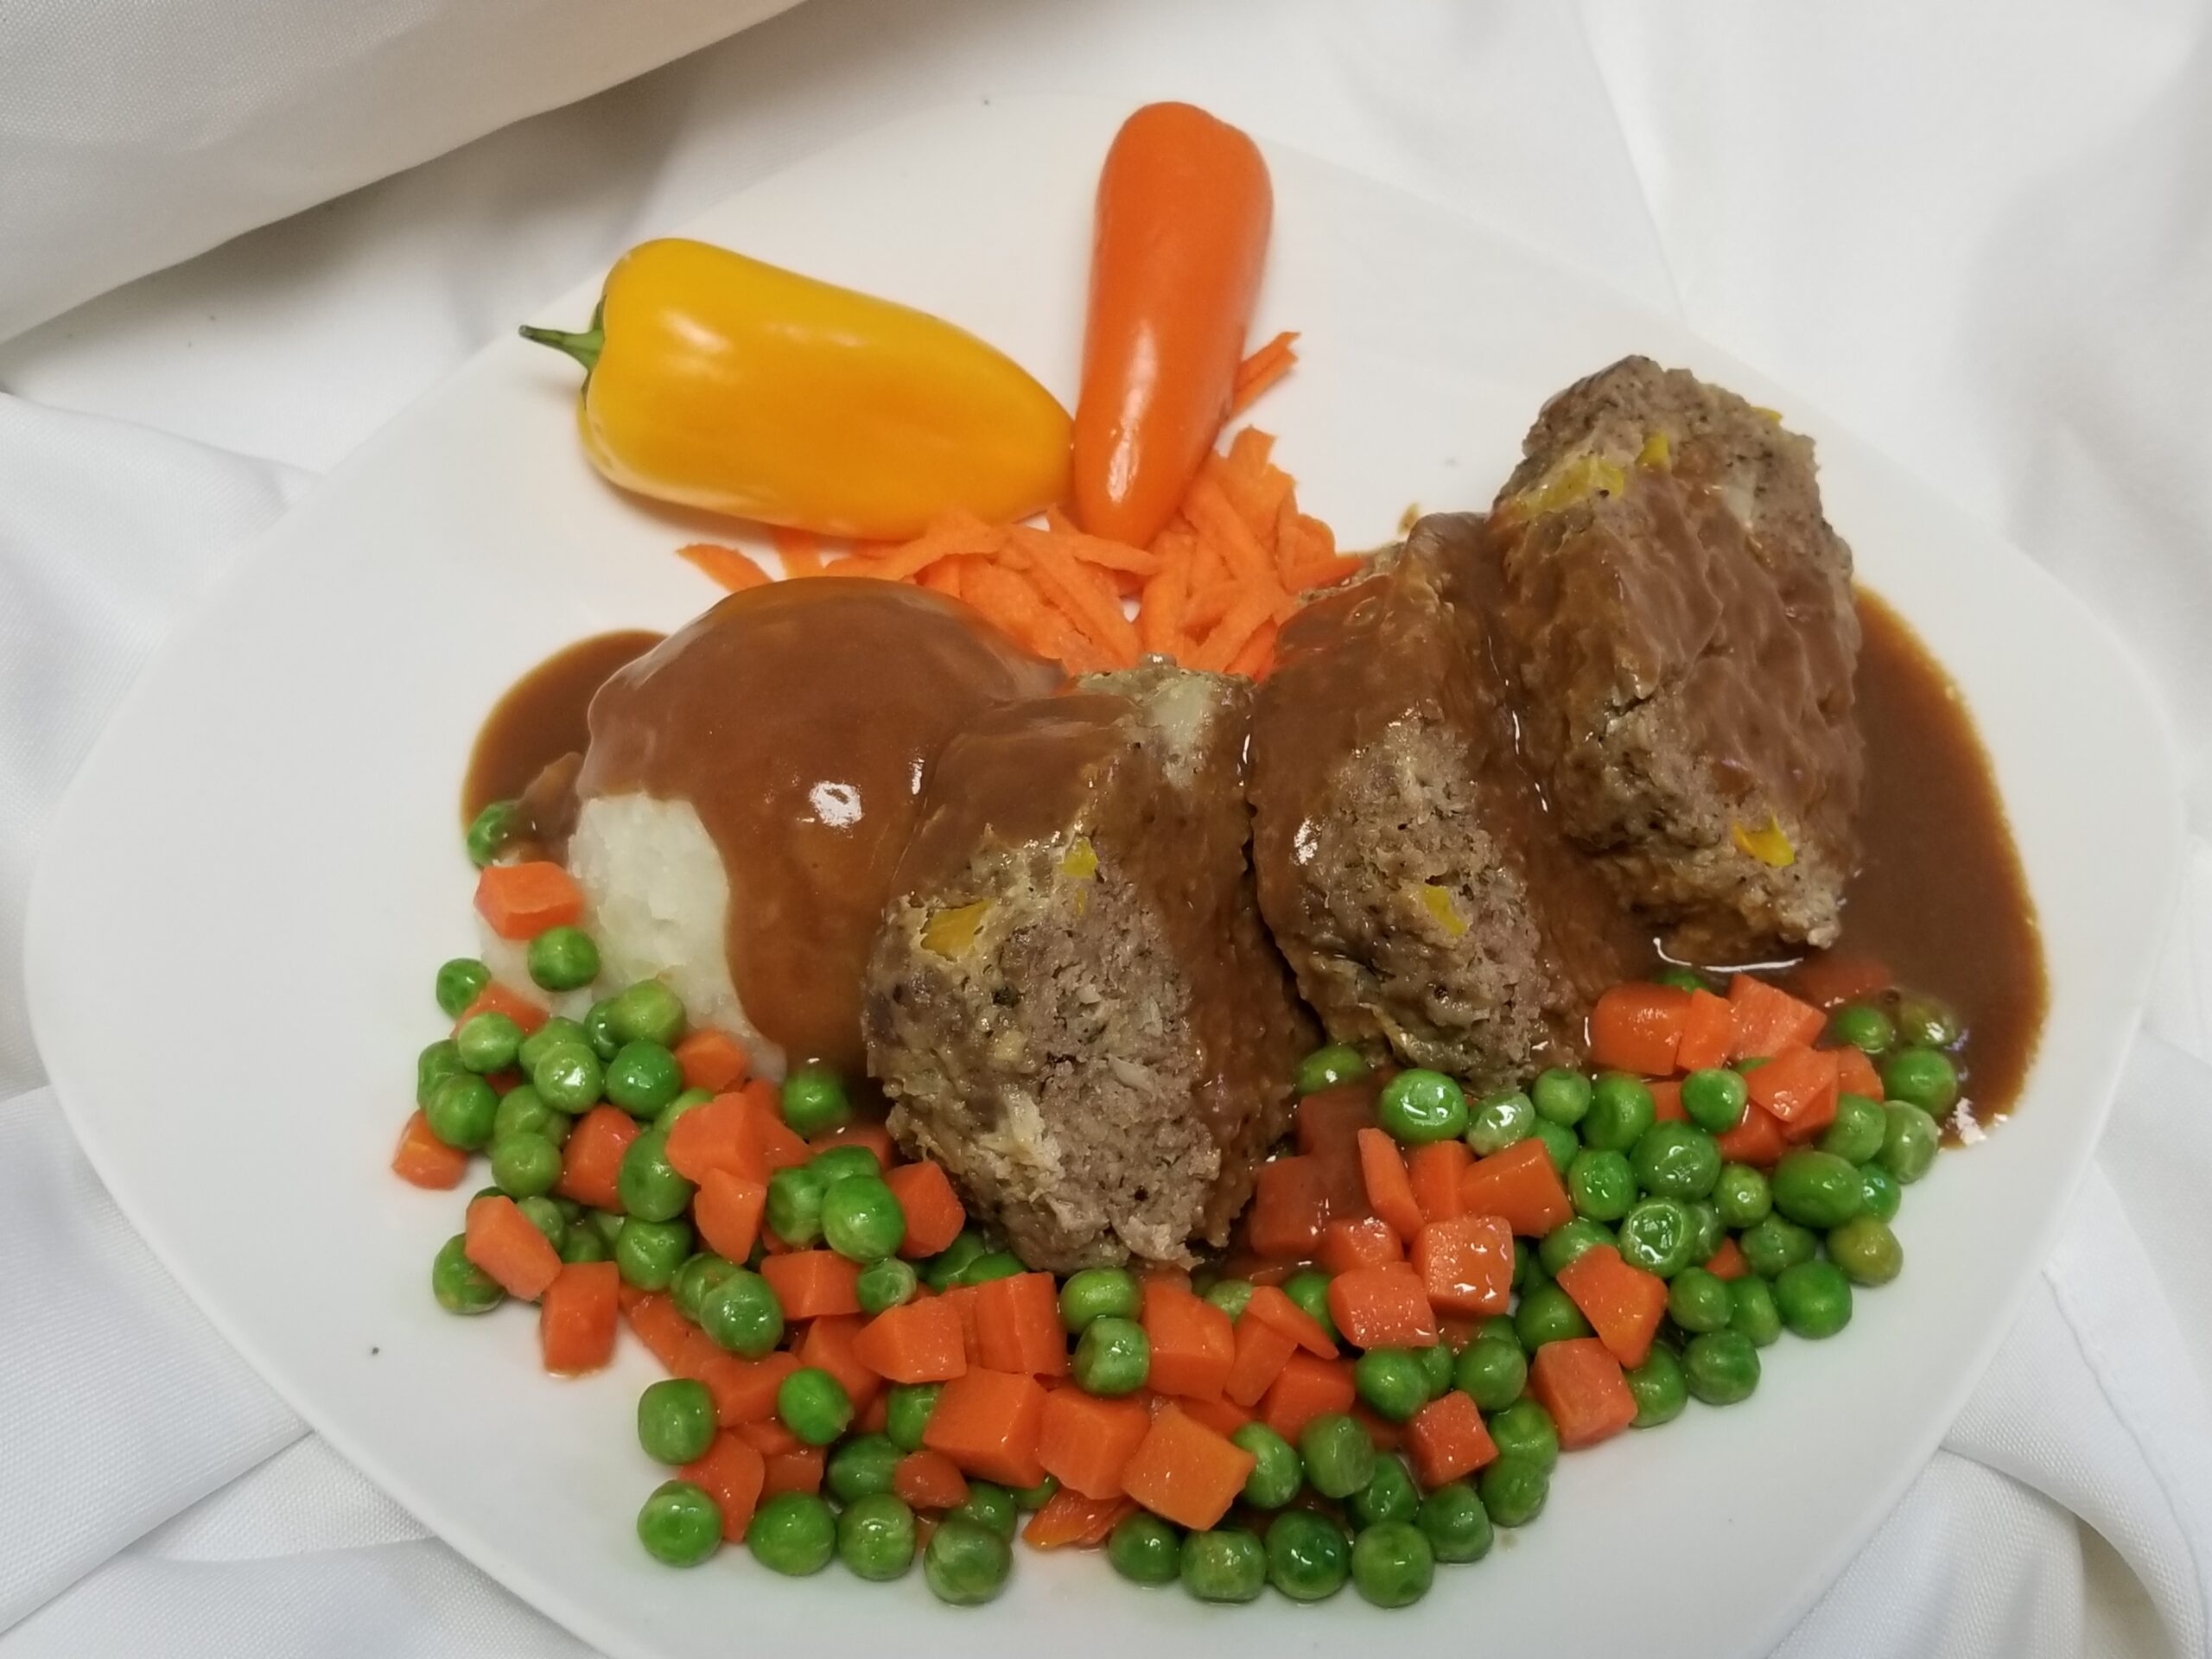 Meatloaf, mashed potatoes, and carrots and peas